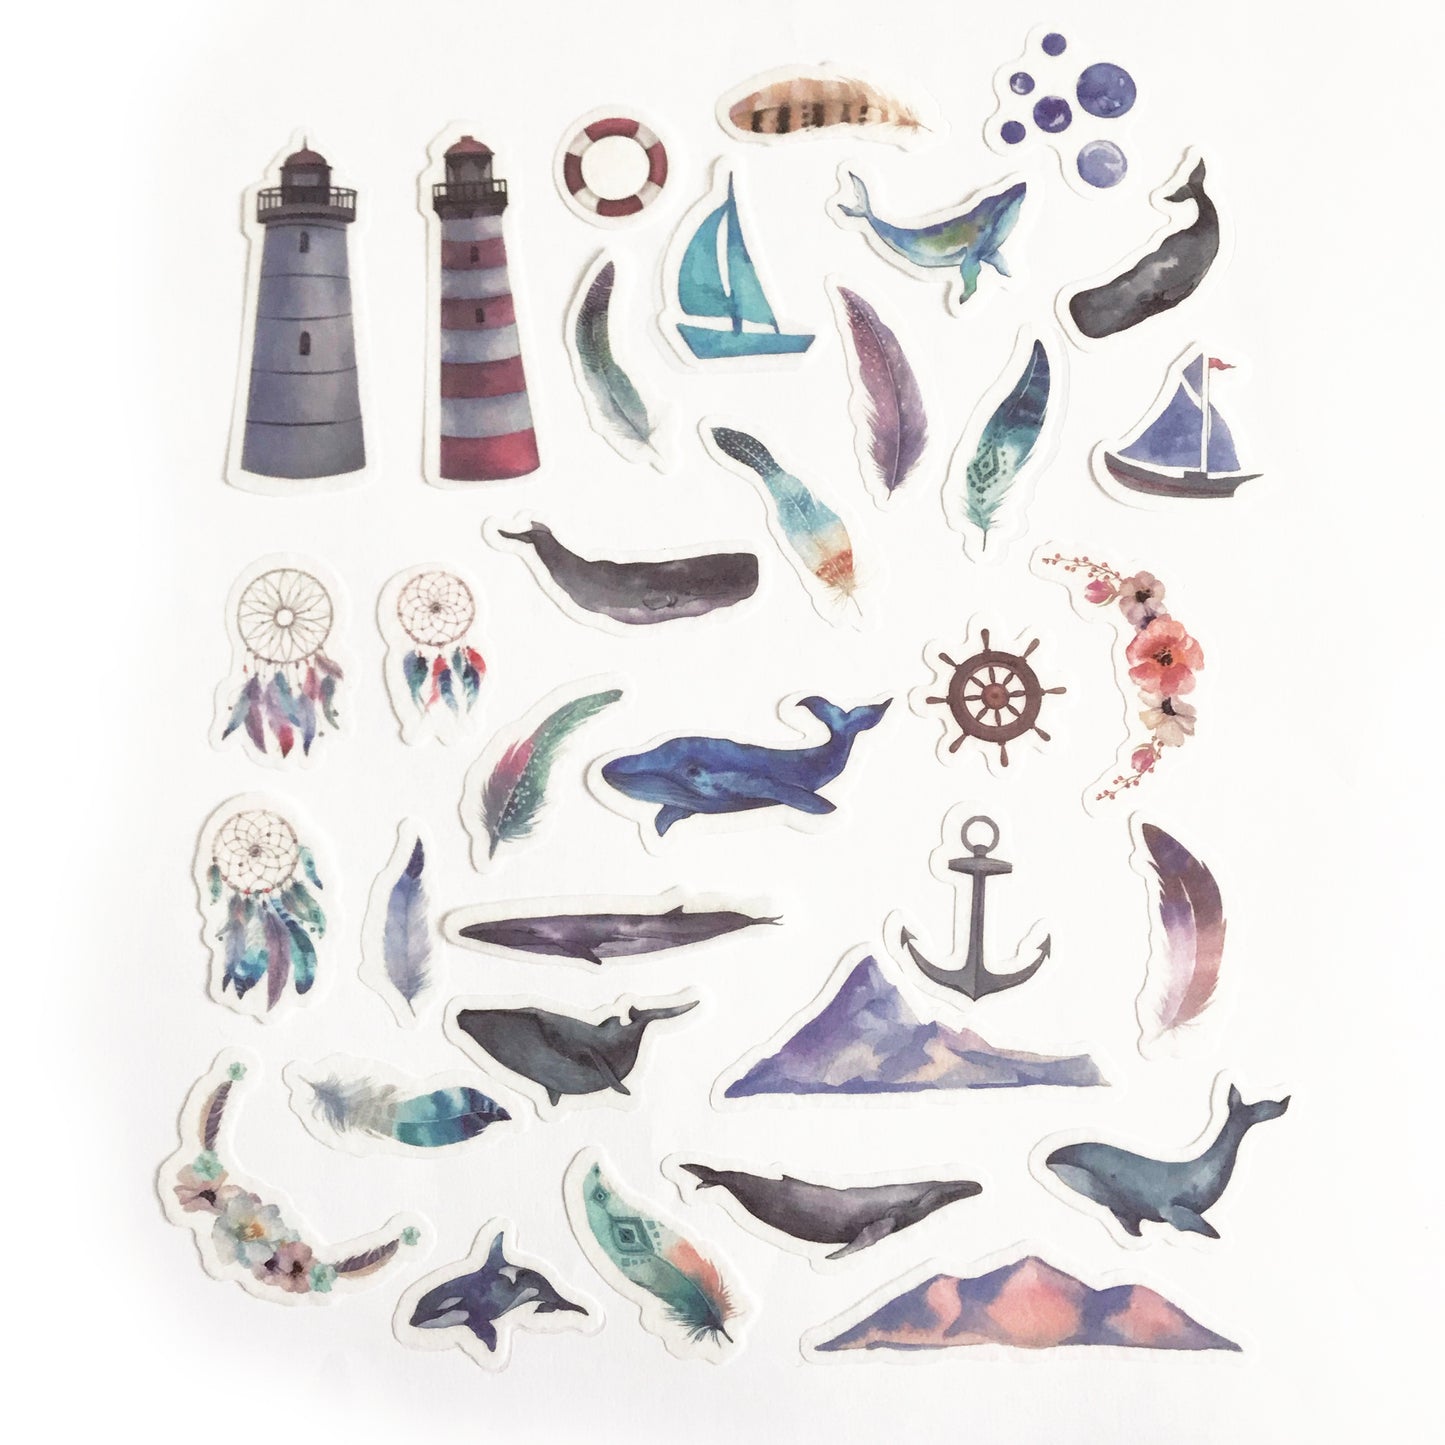 Washi Paper Stickers 40 Sea & Ocean Set | Whale Octopus Fish Crab Shell Beach - SweetpeaStore